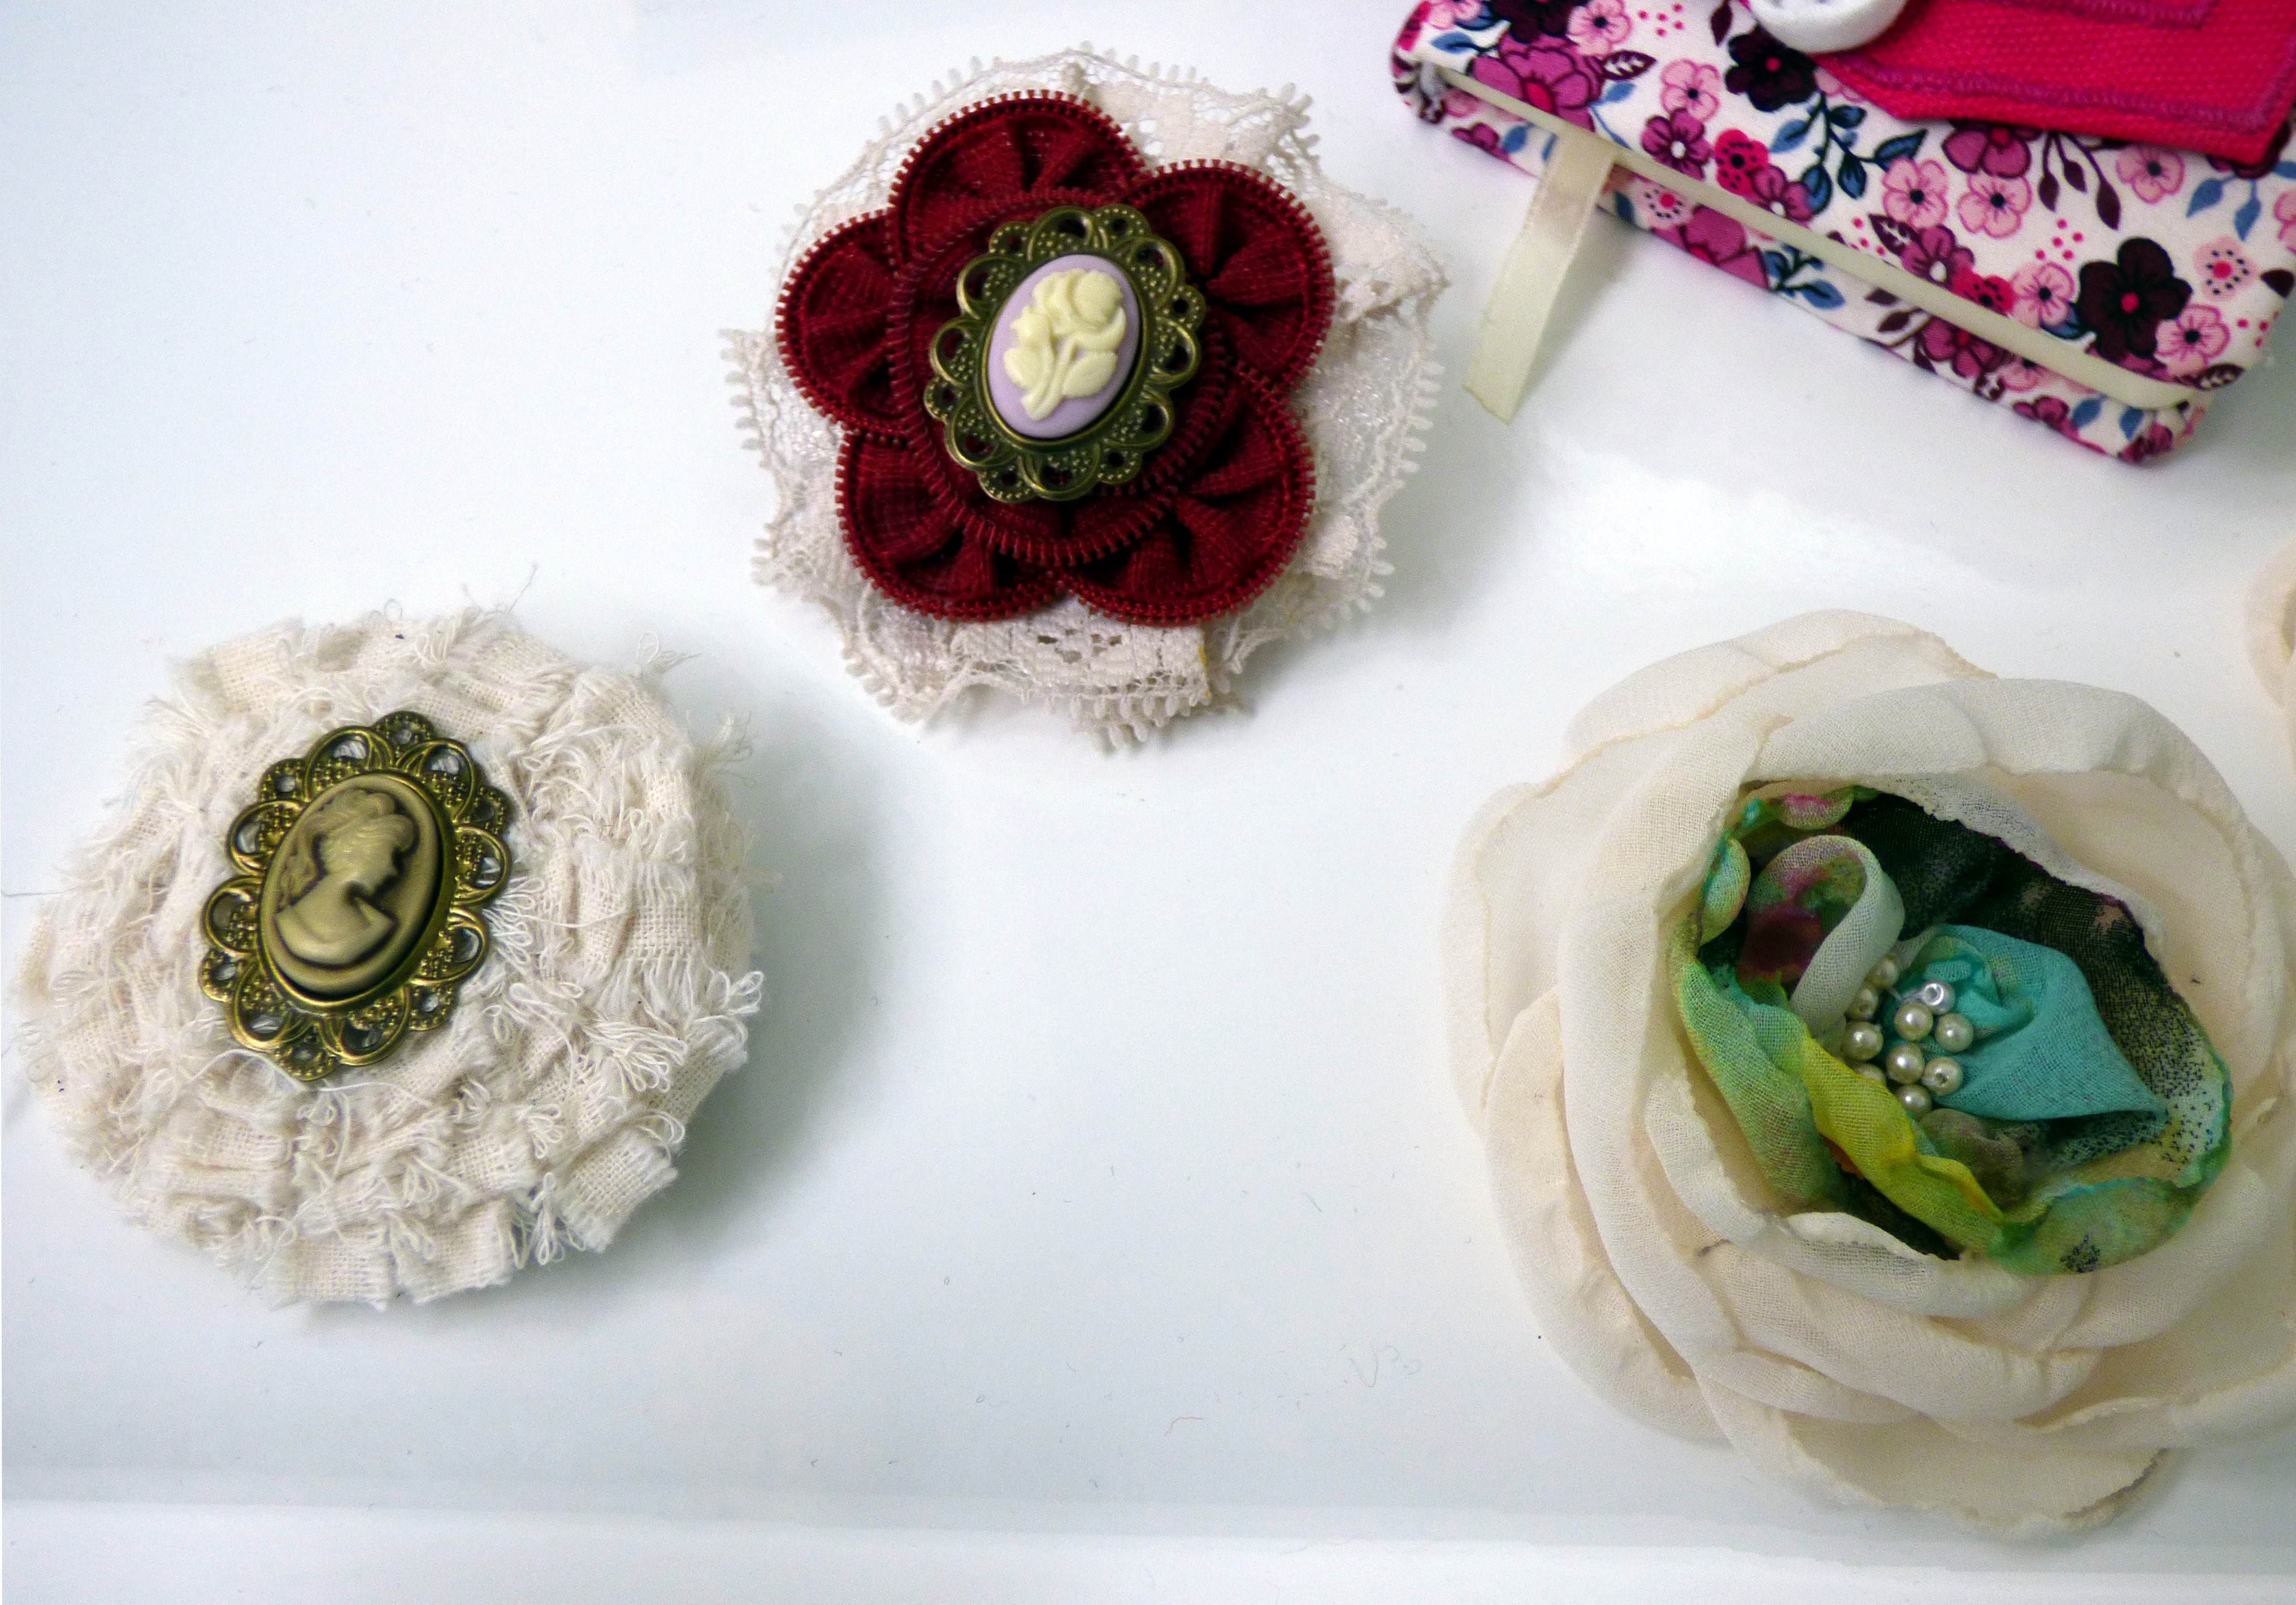 FABRIC BROOCHES by Tina Leahey, recycled textiles, CRAFTED exhibition, Huyton Gallery, 2016